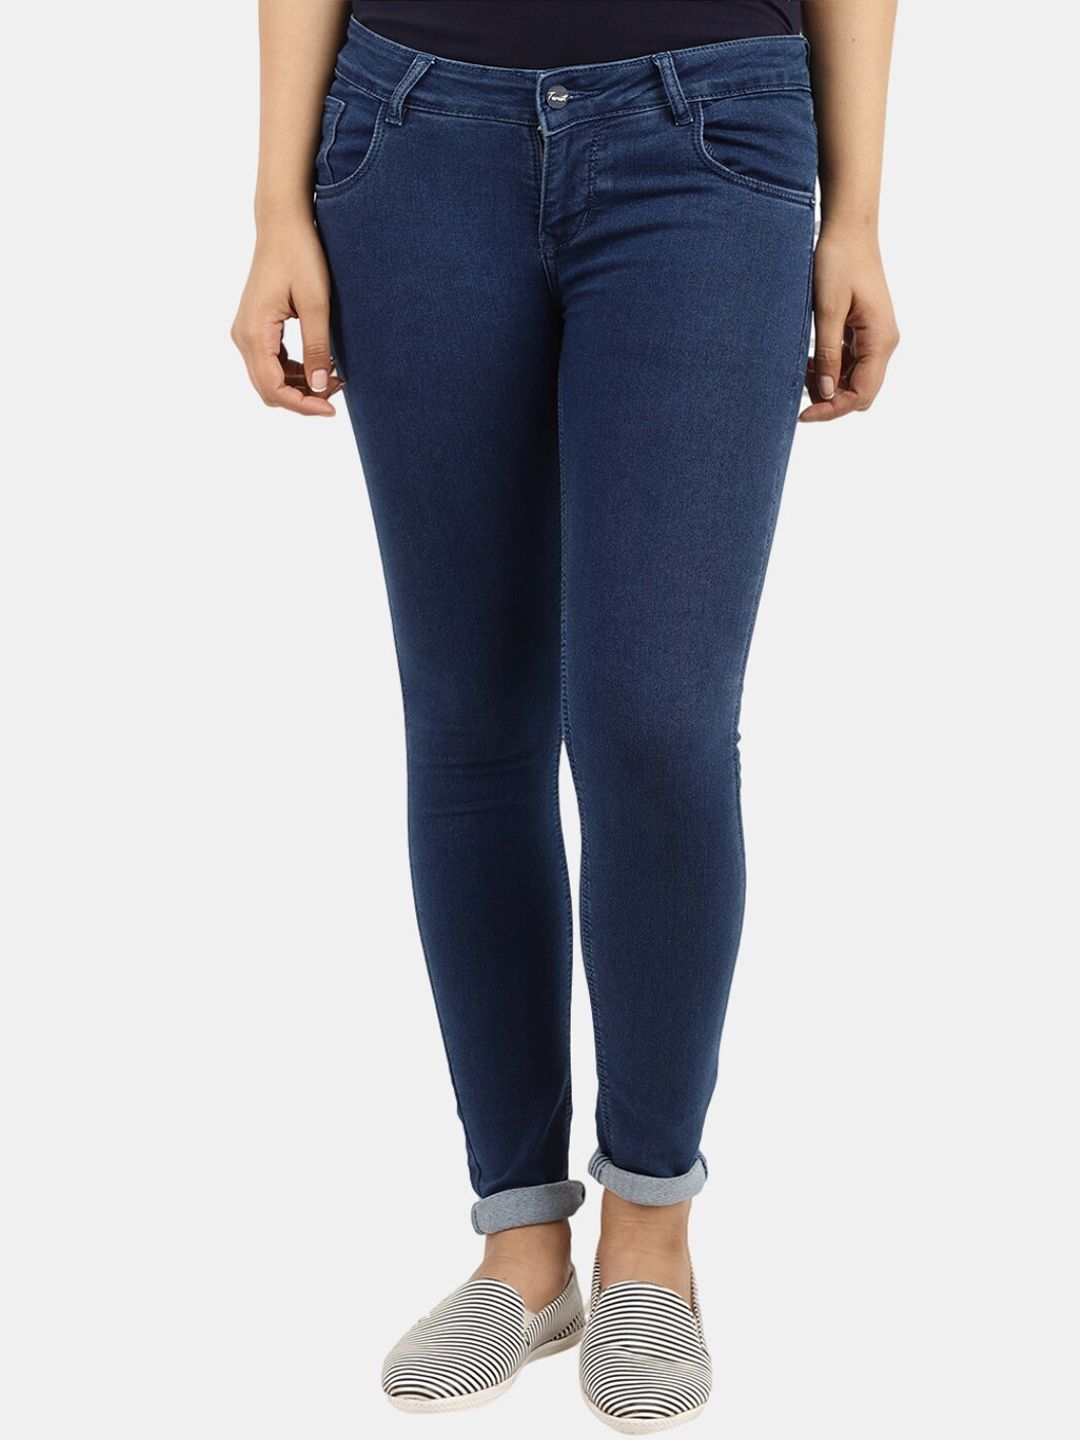 V-Mart Women Blue No Fade Cotton Jeans Price in India